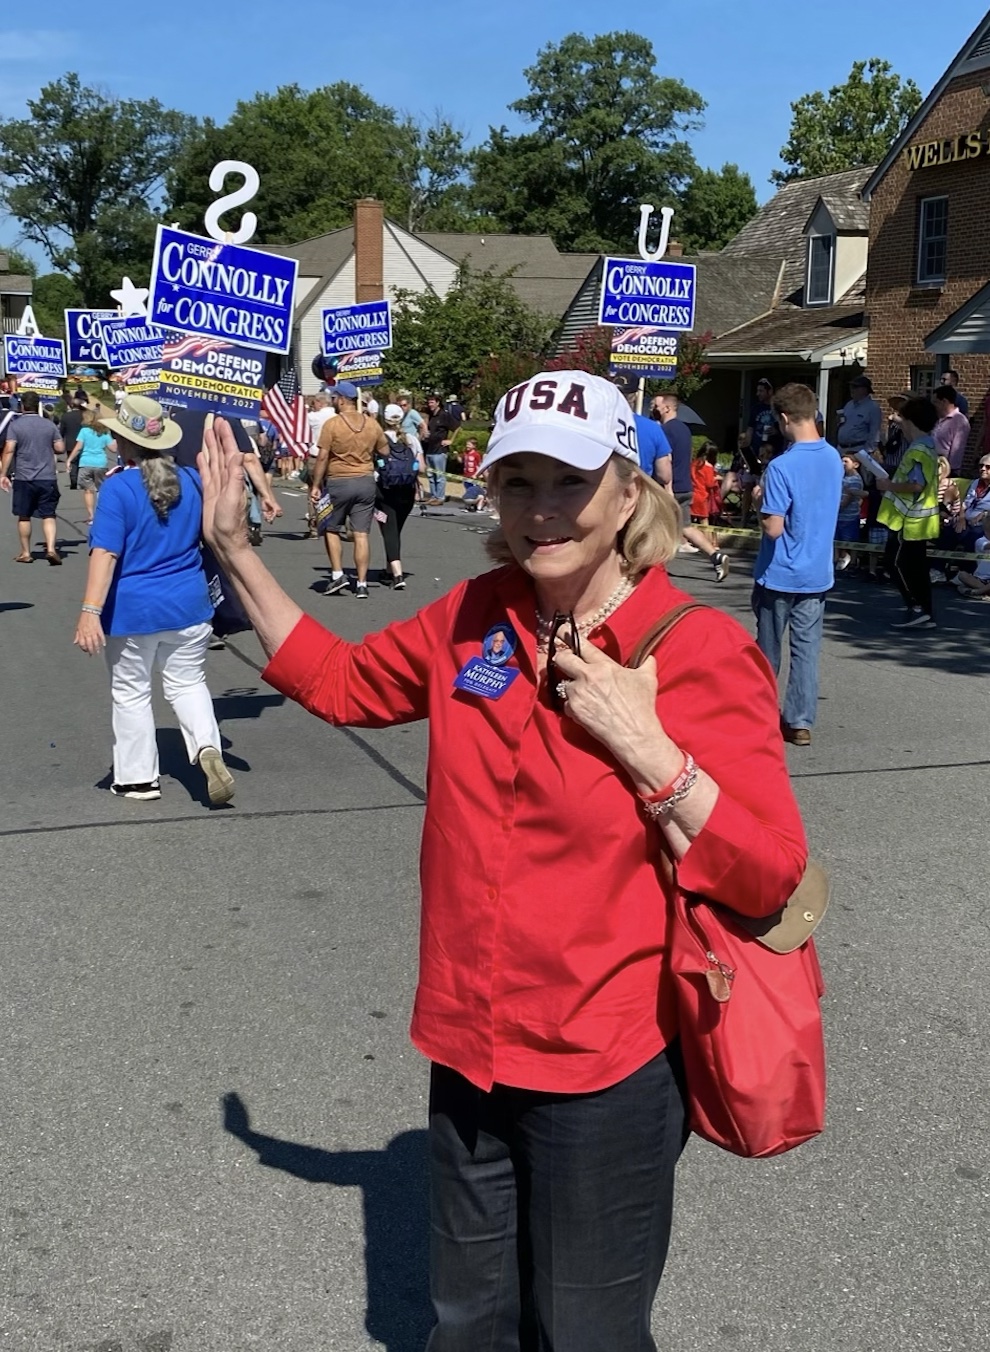 Delegate Murphy marching at the annual Great Falls Parade